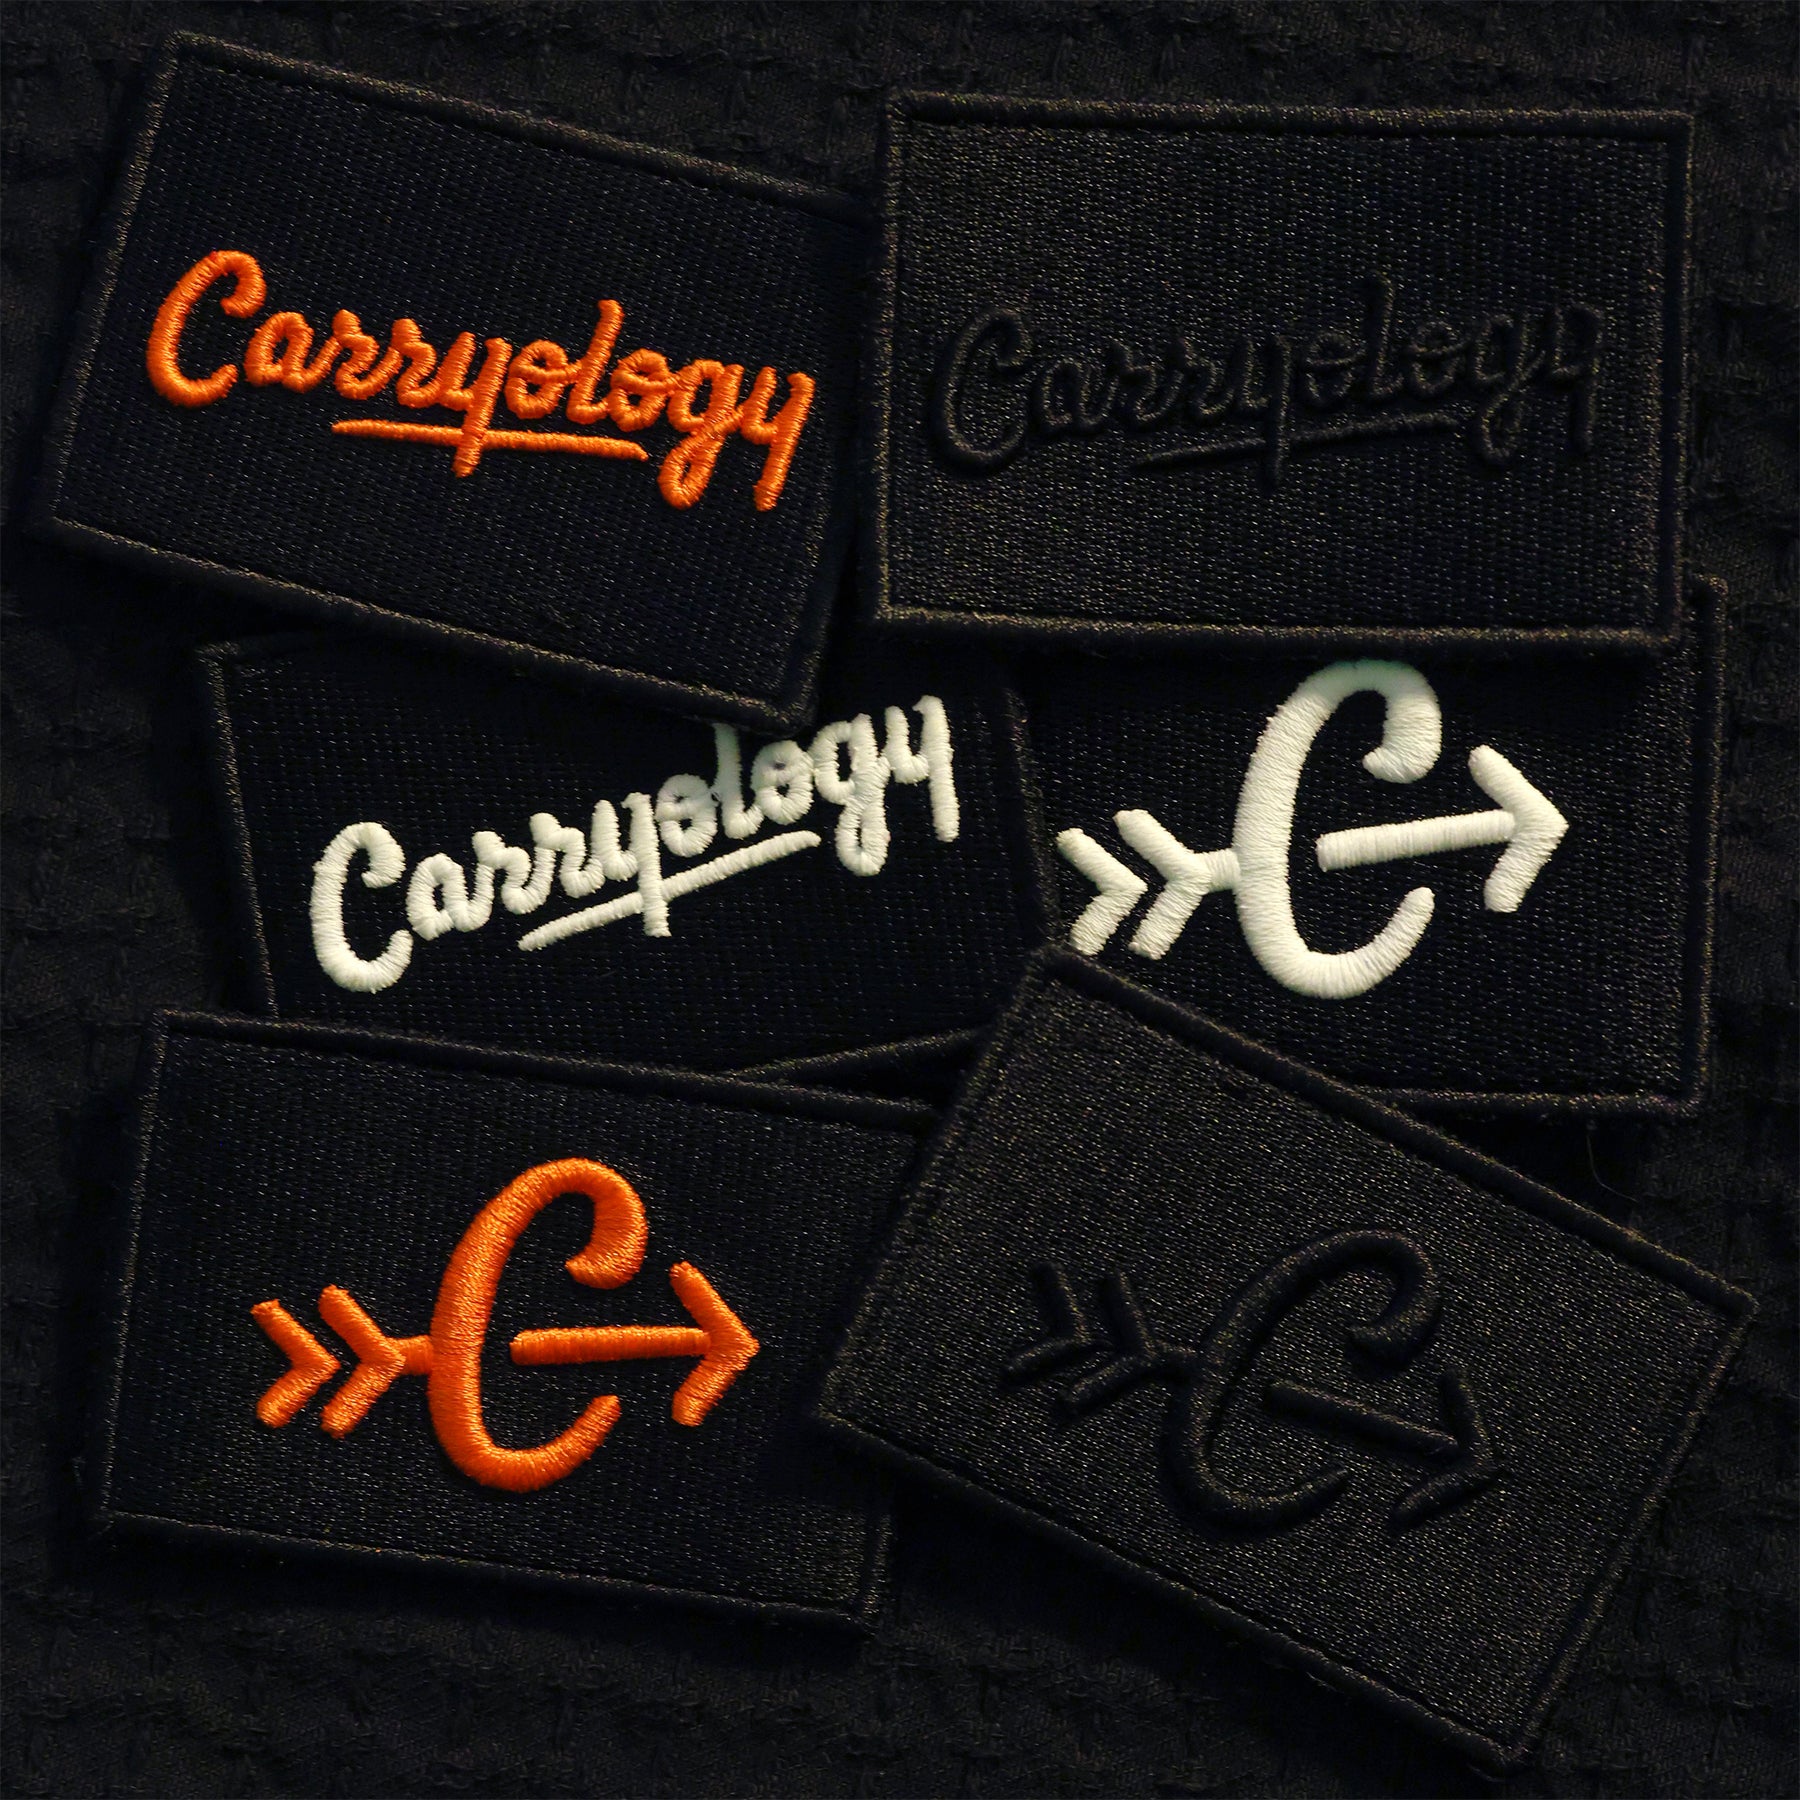 13 Great Morale Patches for Everyday Carry (EDC)